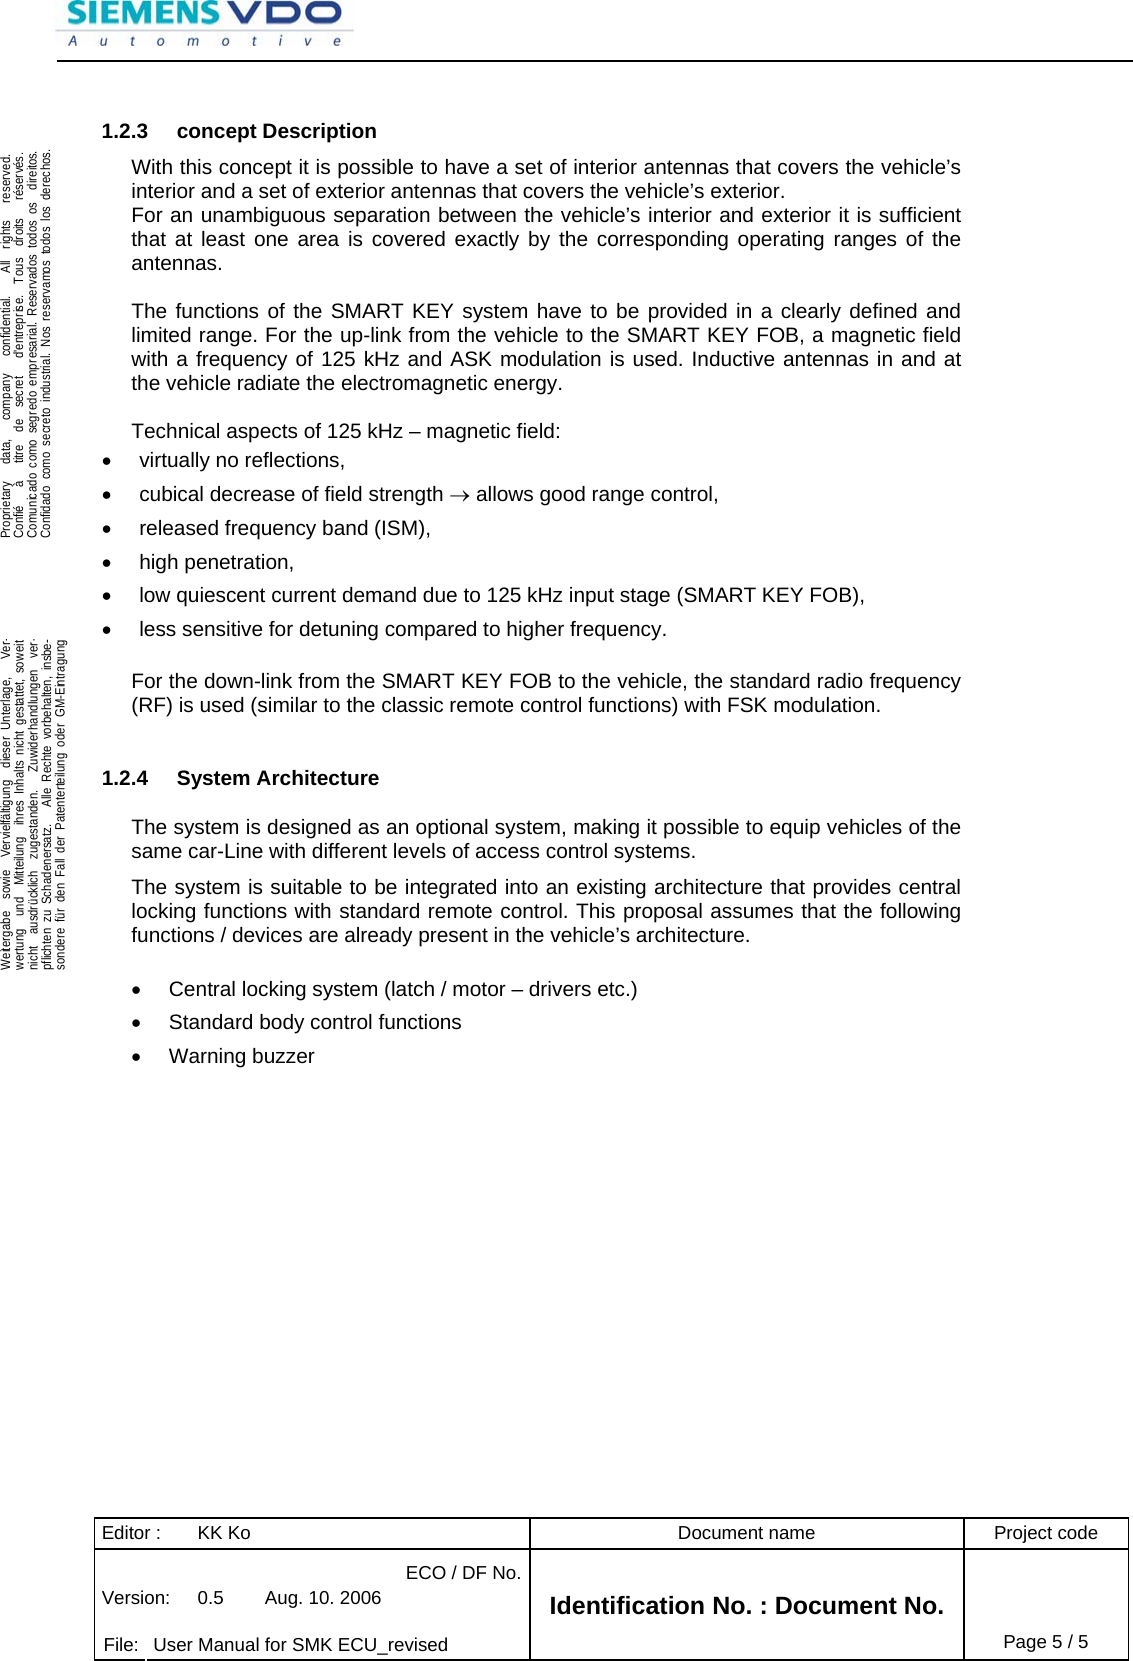 Editor :  KK Ko  Document name  Project code ECO / DF No.Version:  0.5  Aug. 10. 2006    File:  User Manual for SMK ECU_revised Identification No. : Document No. Page 5 / 5    .Proprietary   data,   company   confidential.    All  rights   reserved.Confié   à   titre  de  secret   d&apos;entreprise.  Tous  droits   réservés.Comunicado como segredo empresarial. Reservados todos os  direitos.Confidado como secreto industrial. Nos reservamos todos los derechos.  .Weitergabe  sowie  Vervielfältigung  dieser Unterlage,   Ver-wertung  und  Mitteilung  ihres Inhalts nicht gestattet, soweitnicht  ausdrücklich  zugestanden.   Zuwiderhandlungen  ver-pflichten zu Schadenersatz.   Alle Rechte vorbehalten, insbe-sondere für den Fall der Patenterteilung oder GM-Eintragung  1.2.3 concept Description With this concept it is possible to have a set of interior antennas that covers the vehicle’s interior and a set of exterior antennas that covers the vehicle’s exterior. For an unambiguous separation between the vehicle’s interior and exterior it is sufficient that at least one area is covered exactly by the corresponding operating ranges of the antennas.  The functions of the SMART KEY system have to be provided in a clearly defined and limited range. For the up-link from the vehicle to the SMART KEY FOB, a magnetic field with a frequency of 125 kHz and ASK modulation is used. Inductive antennas in and at the vehicle radiate the electromagnetic energy.  Technical aspects of 125 kHz – magnetic field: •  virtually no reflections, •  cubical decrease of field strength → allows good range control, •  released frequency band (ISM), • high penetration, •  low quiescent current demand due to 125 kHz input stage (SMART KEY FOB), •  less sensitive for detuning compared to higher frequency.  For the down-link from the SMART KEY FOB to the vehicle, the standard radio frequency (RF) is used (similar to the classic remote control functions) with FSK modulation.  1.2.4 System Architecture The system is designed as an optional system, making it possible to equip vehicles of the same car-Line with different levels of access control systems. The system is suitable to be integrated into an existing architecture that provides central locking functions with standard remote control. This proposal assumes that the following functions / devices are already present in the vehicle’s architecture.   •  Central locking system (latch / motor – drivers etc.) •  Standard body control functions  • Warning buzzer    